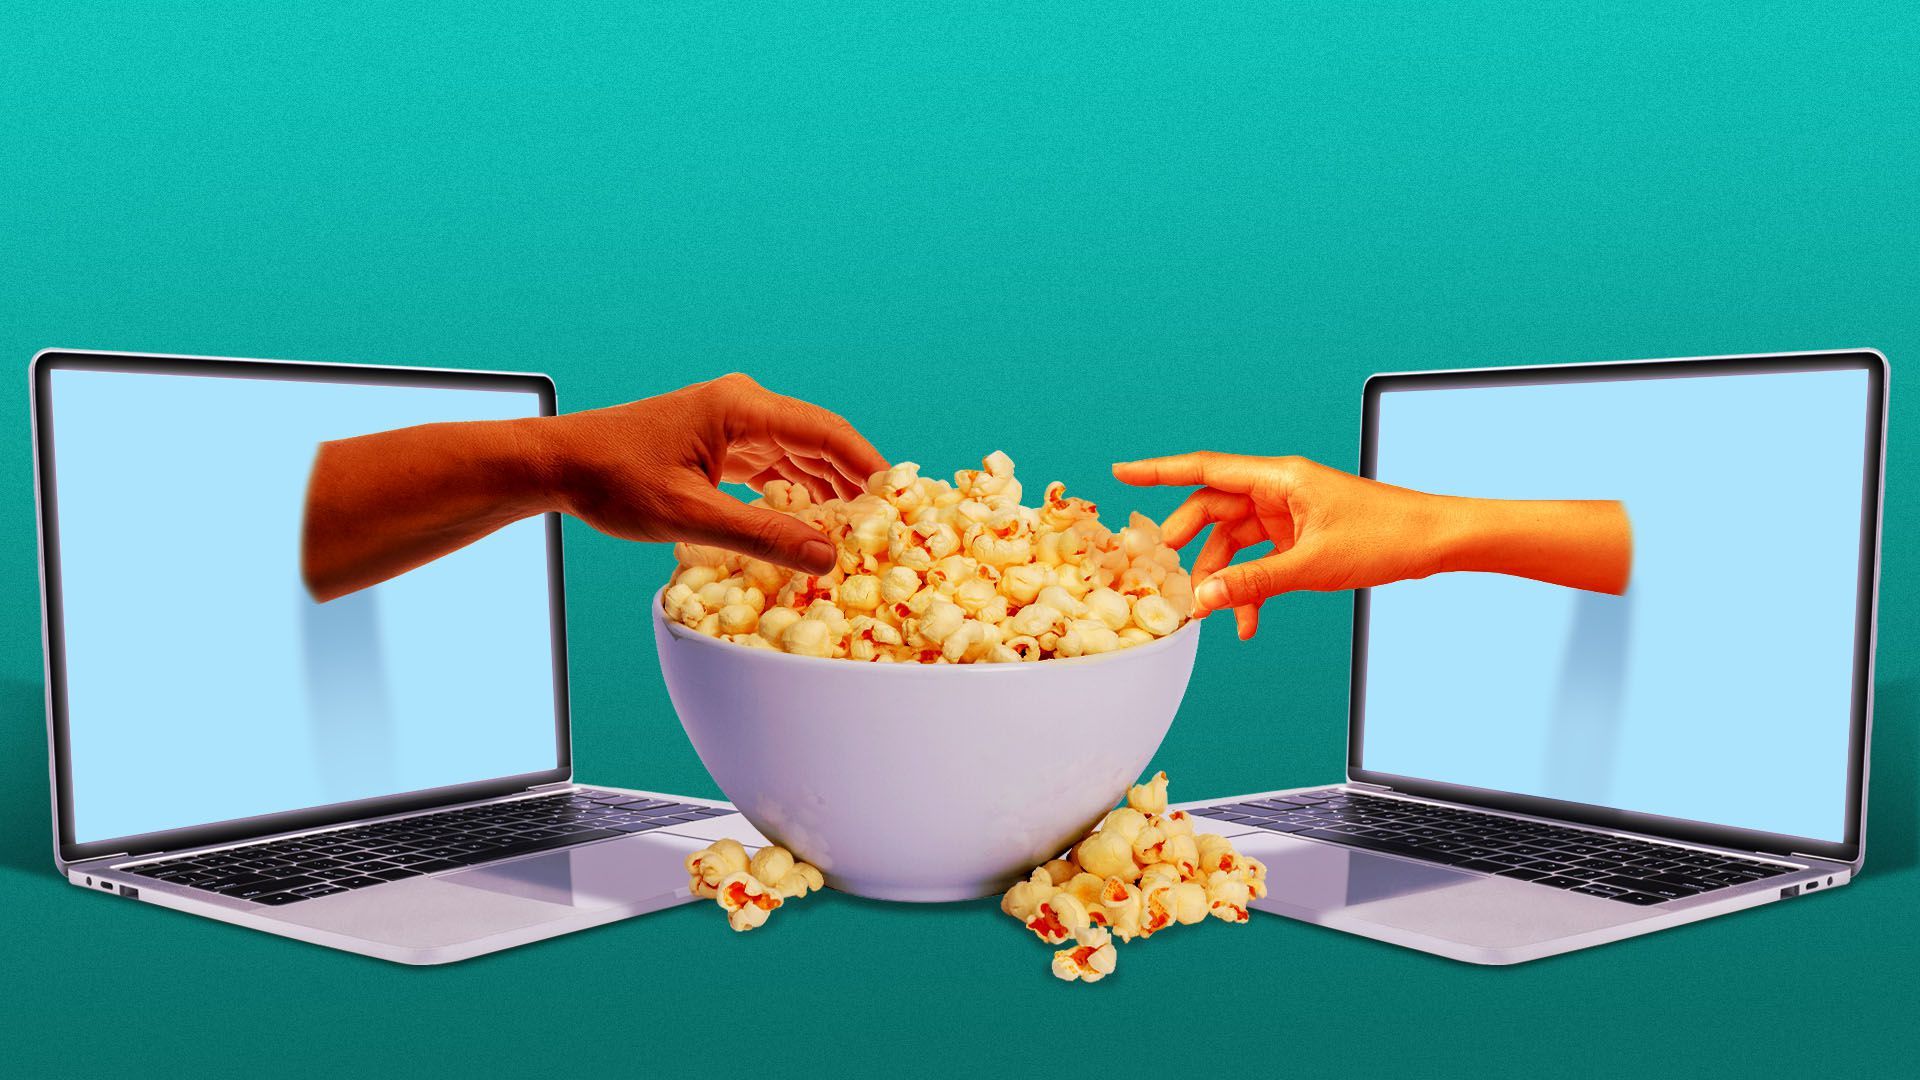 Illustration of two hands coming out of laptop screens to grab a bowl of popcorn